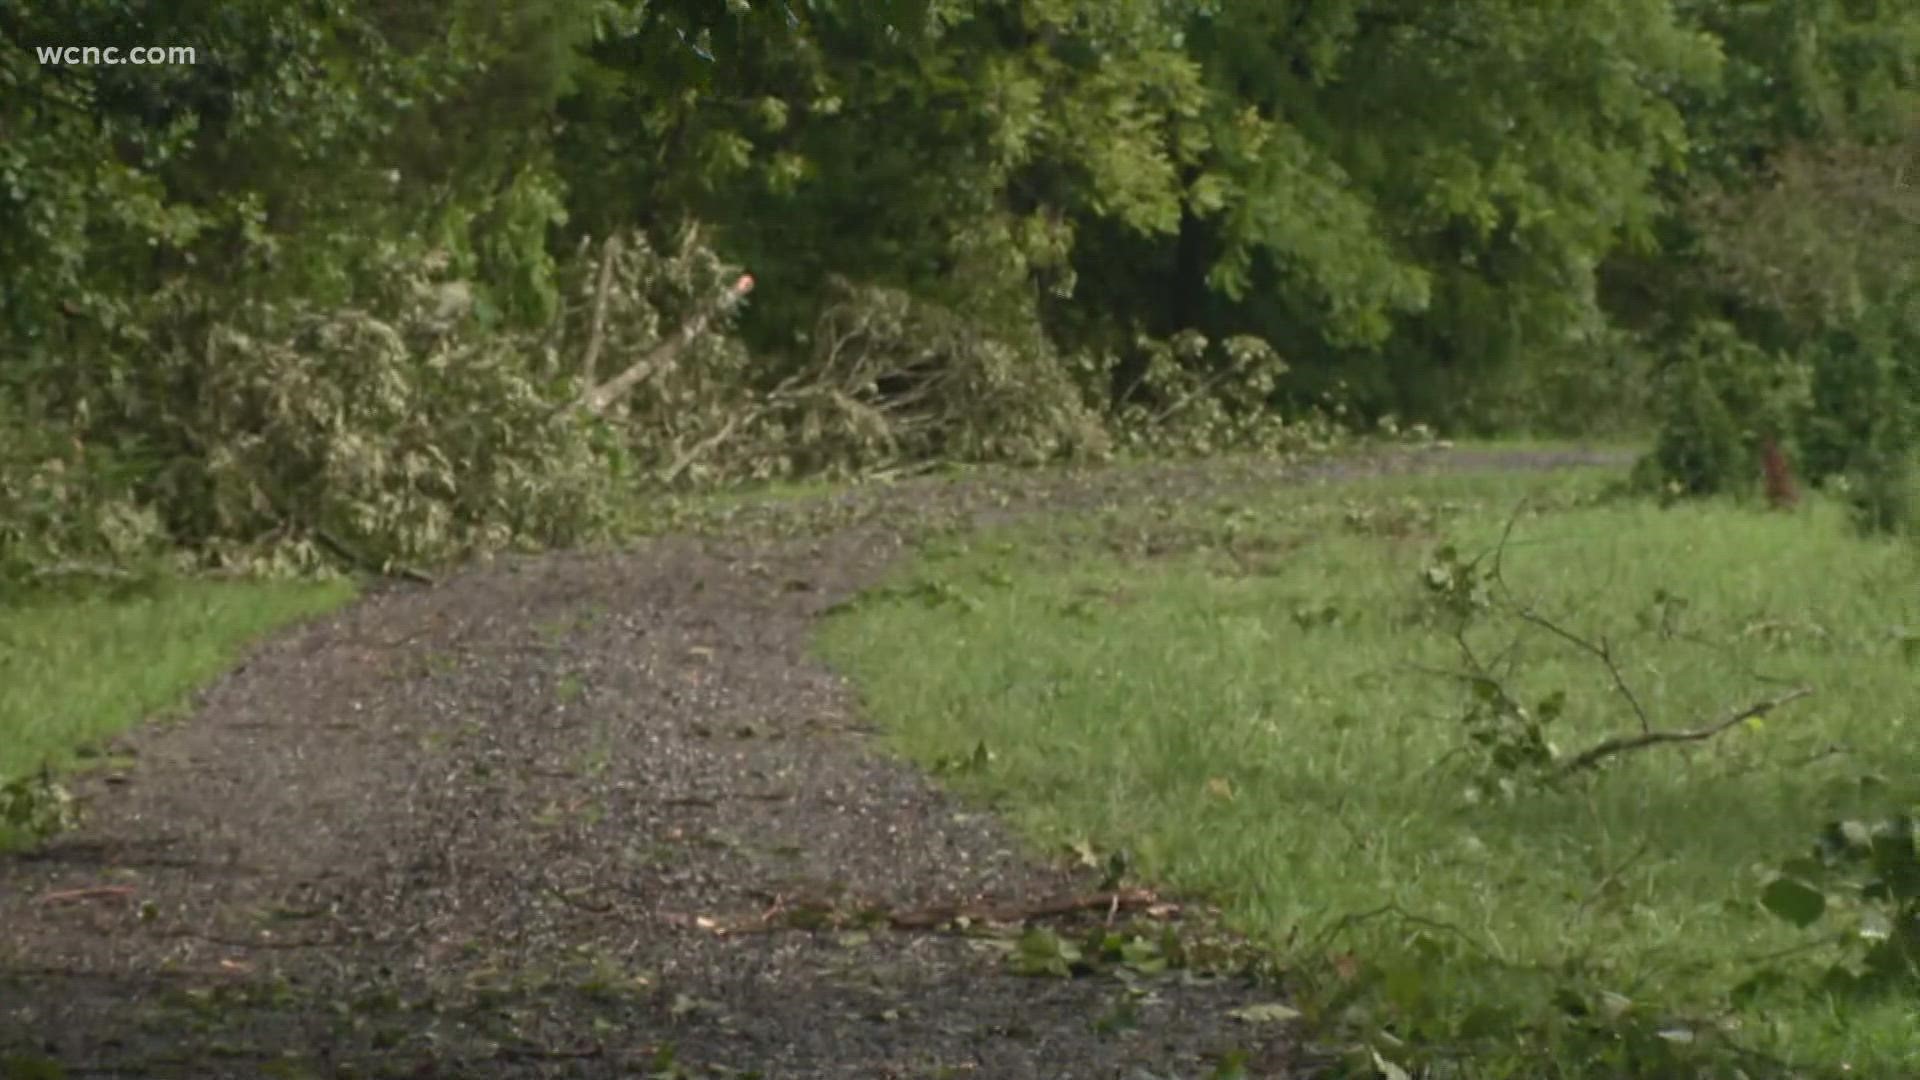 WCNC Charlotte's Brandon Goldner is in Alexander County, keeping an eye on the damage.